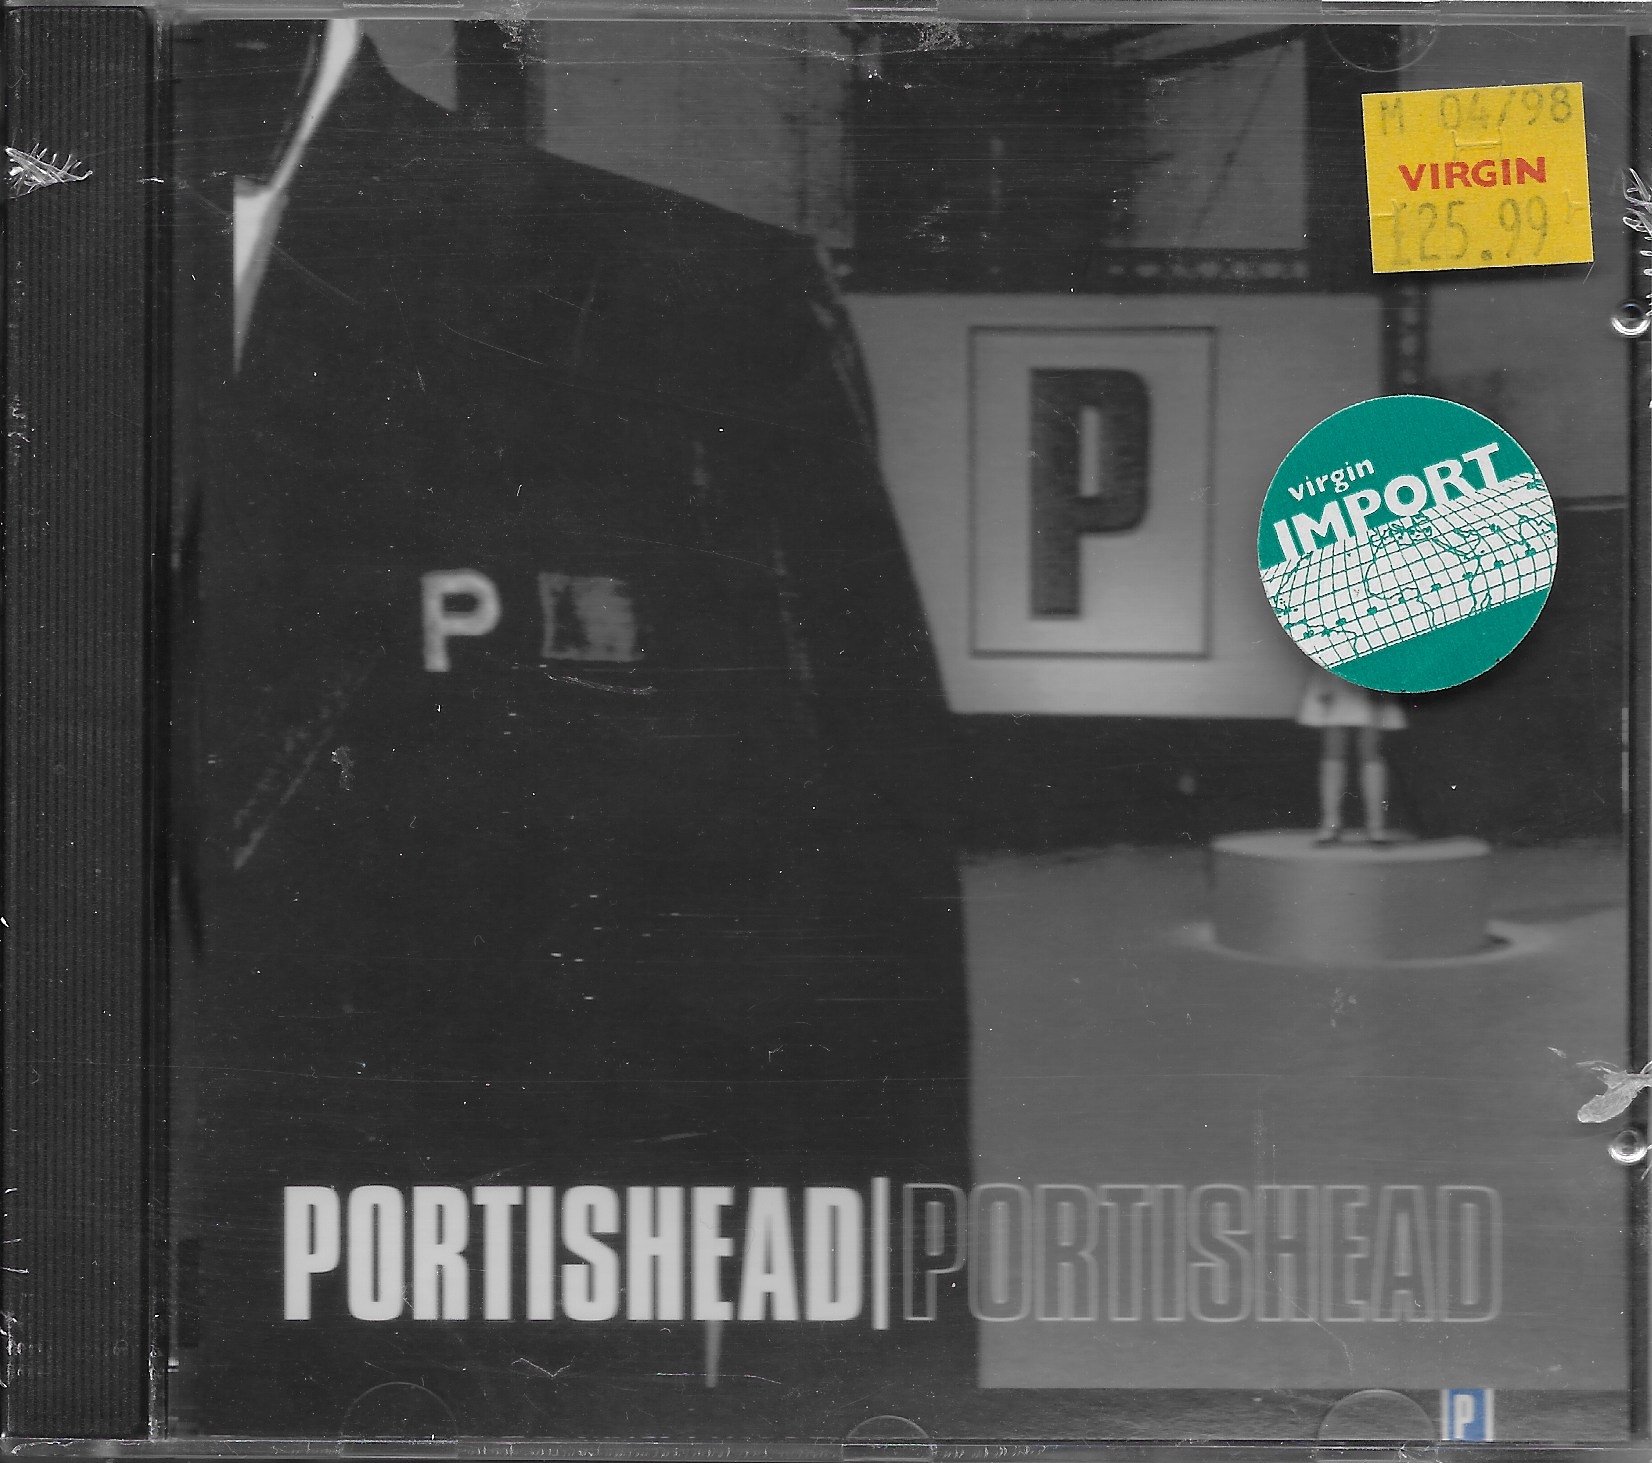 Picture of Portishead by artist Portishead 